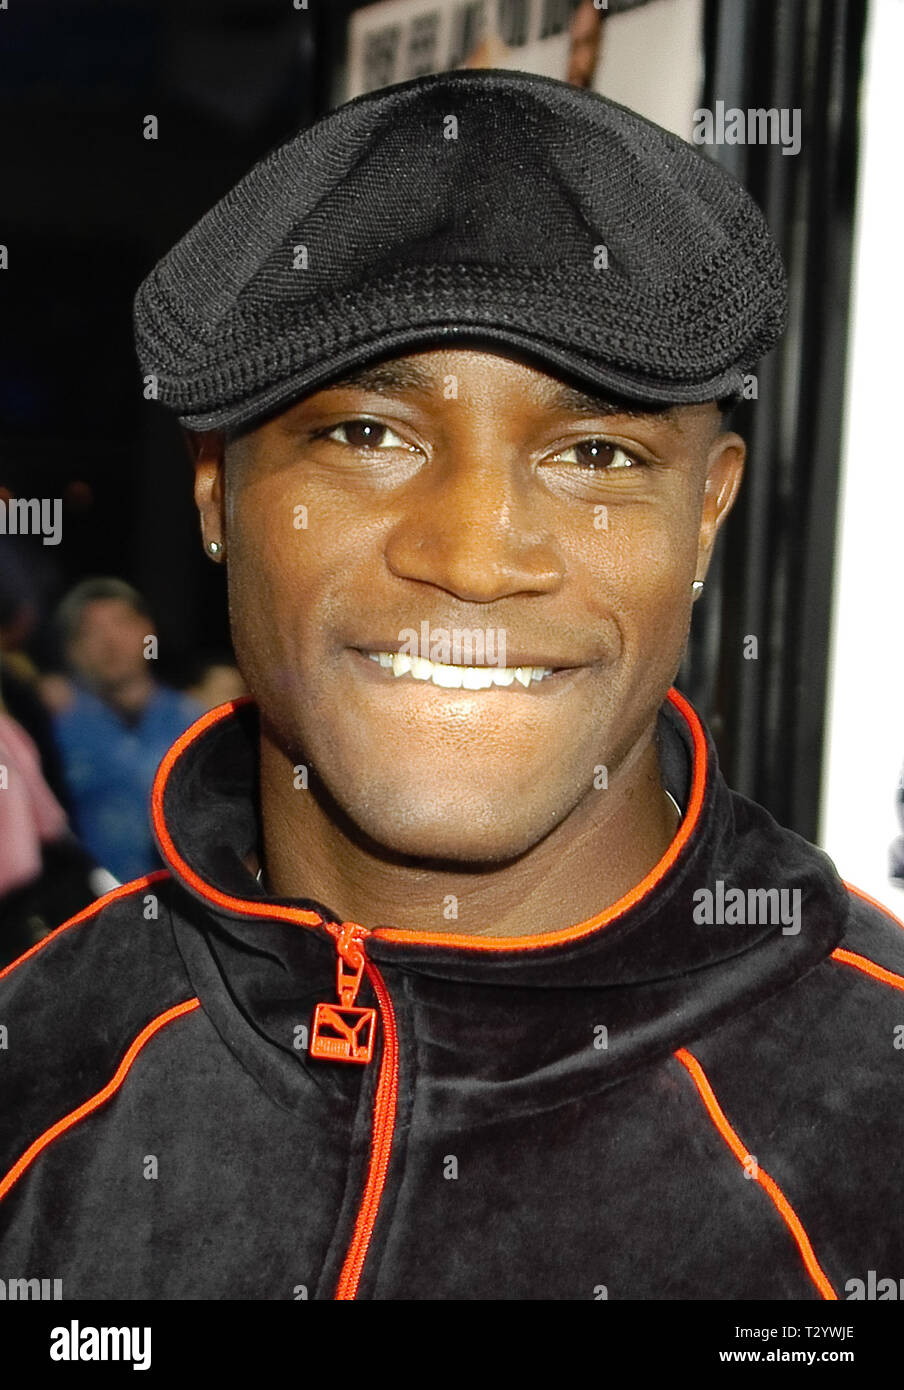 Taye Diggs at the  Premiere of Warner Bros. 'Malibu's Most Wanted', held at Grauman's Chinese Theater in Hollywood, CA. The event took place on Thursday, April 10, 2003.  Photo by: SBM / PictureLux  File Reference # 33790 791SBMPLX Stock Photo